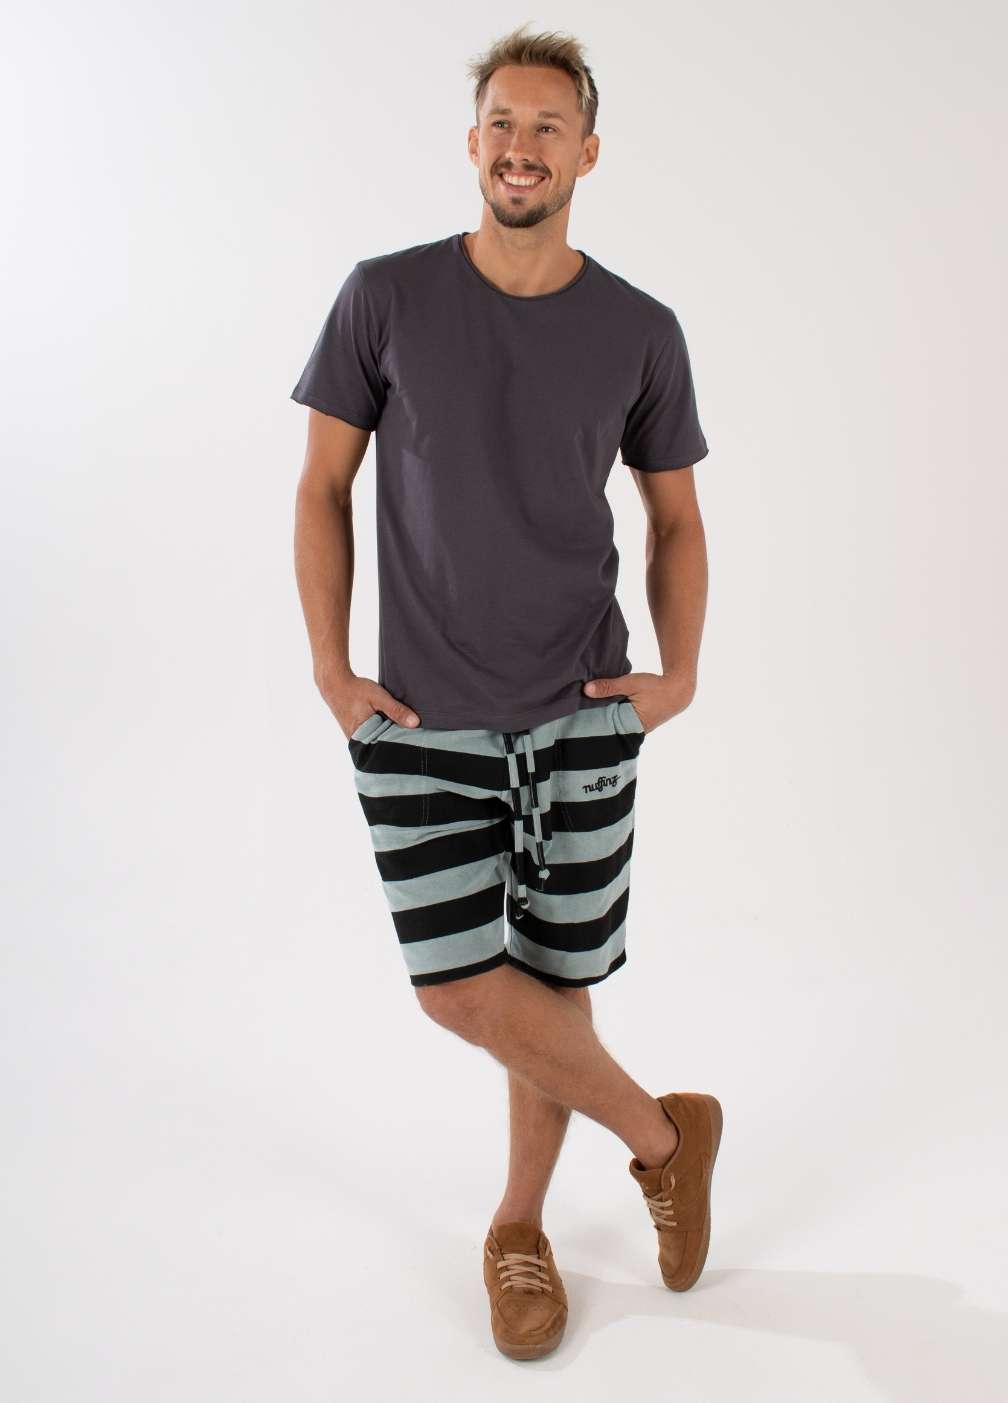 nuffinz SILVER BLUE TOWEL SHORTS ST - whole outfit visible from the side / front - made out of organic terry cloth - sustainable men's shorts - silver blue striped